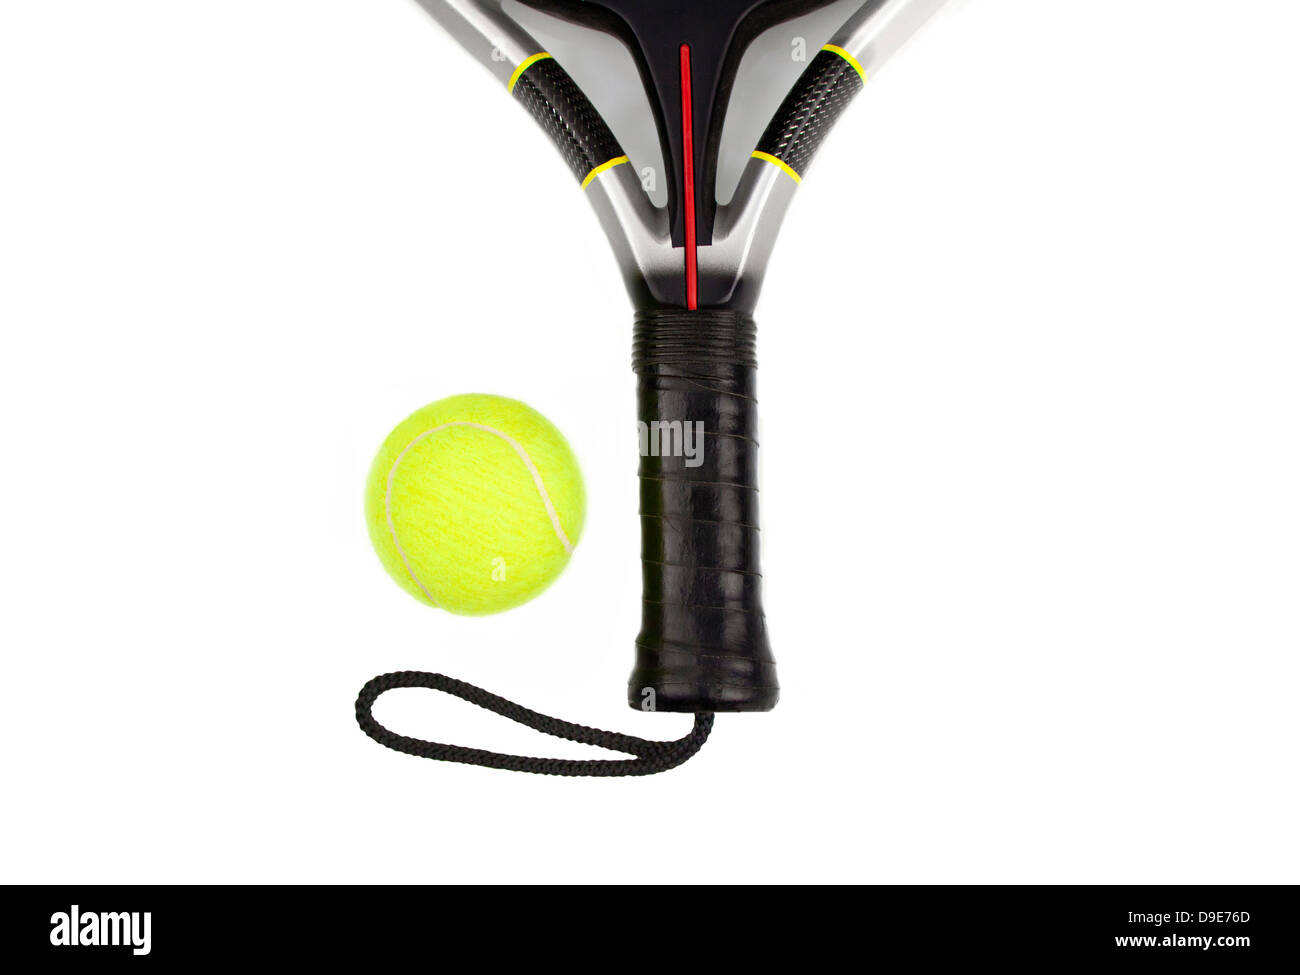 Professional padel-tennis racket and ball isolated in white background. Stock Photo